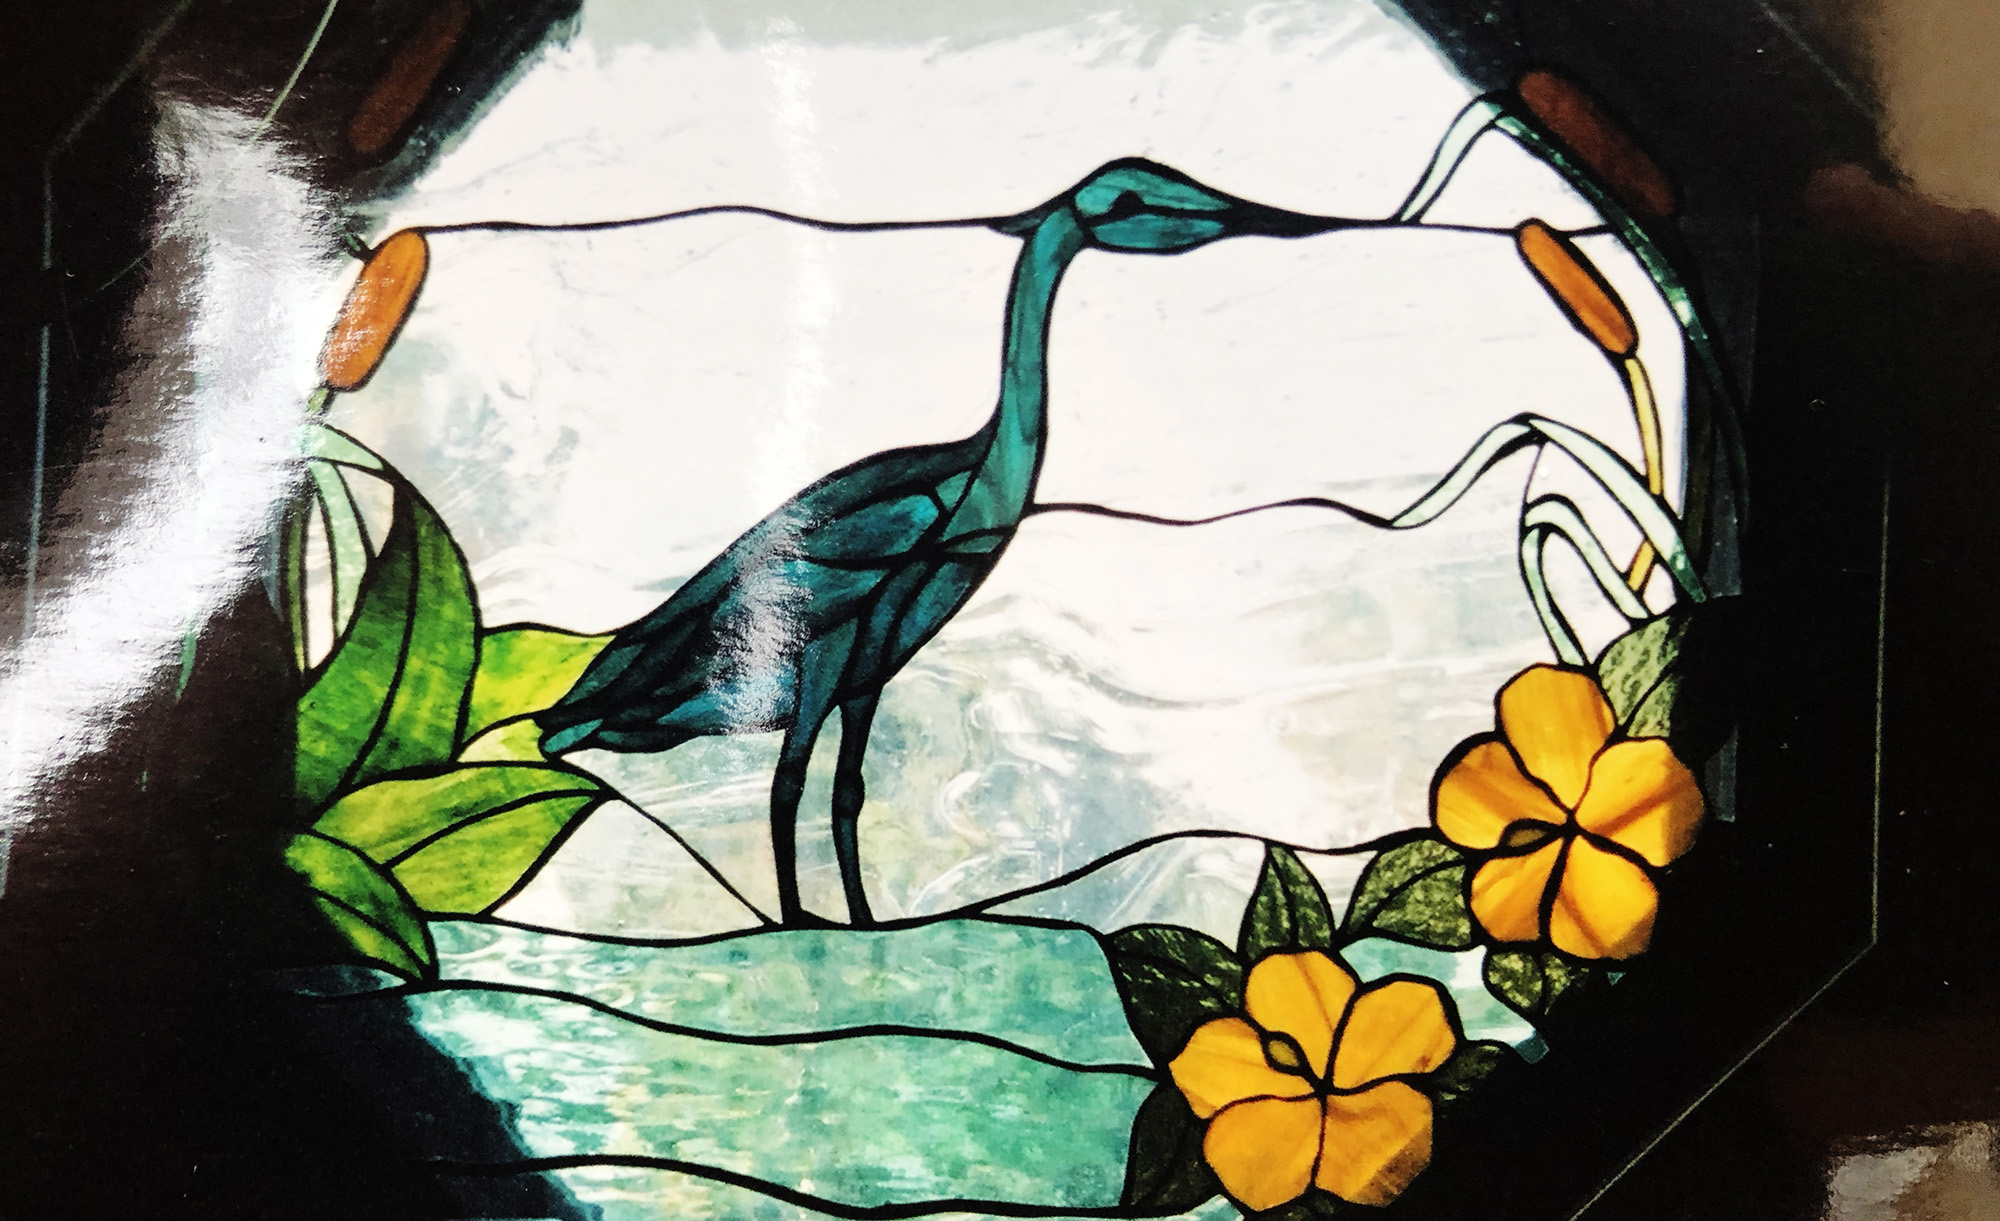 Built-in Egret, stained glass passion